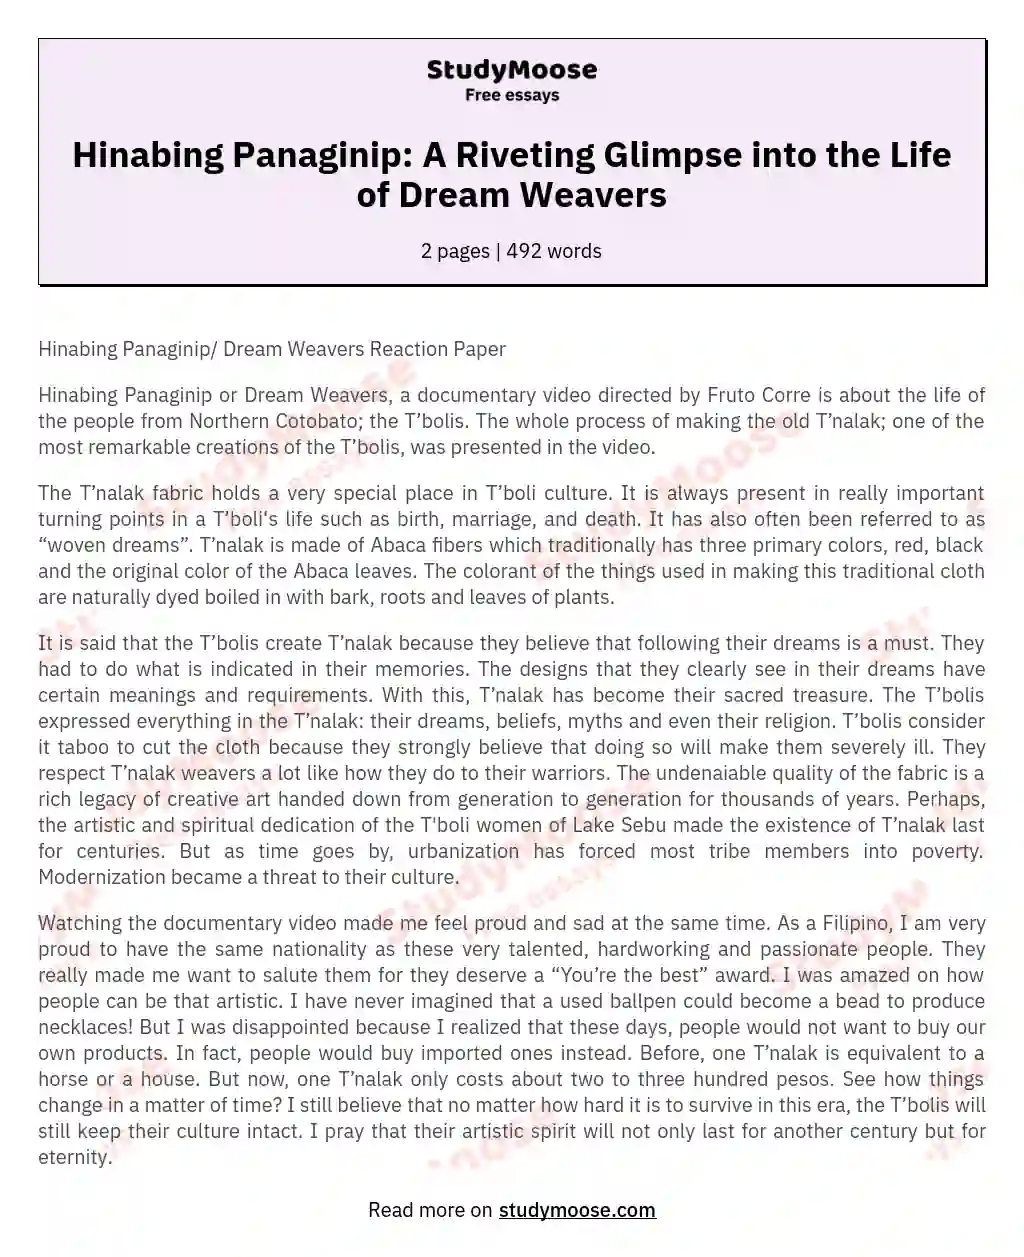 Hinabing Panaginip: A Riveting Glimpse into the Life of Dream Weavers essay